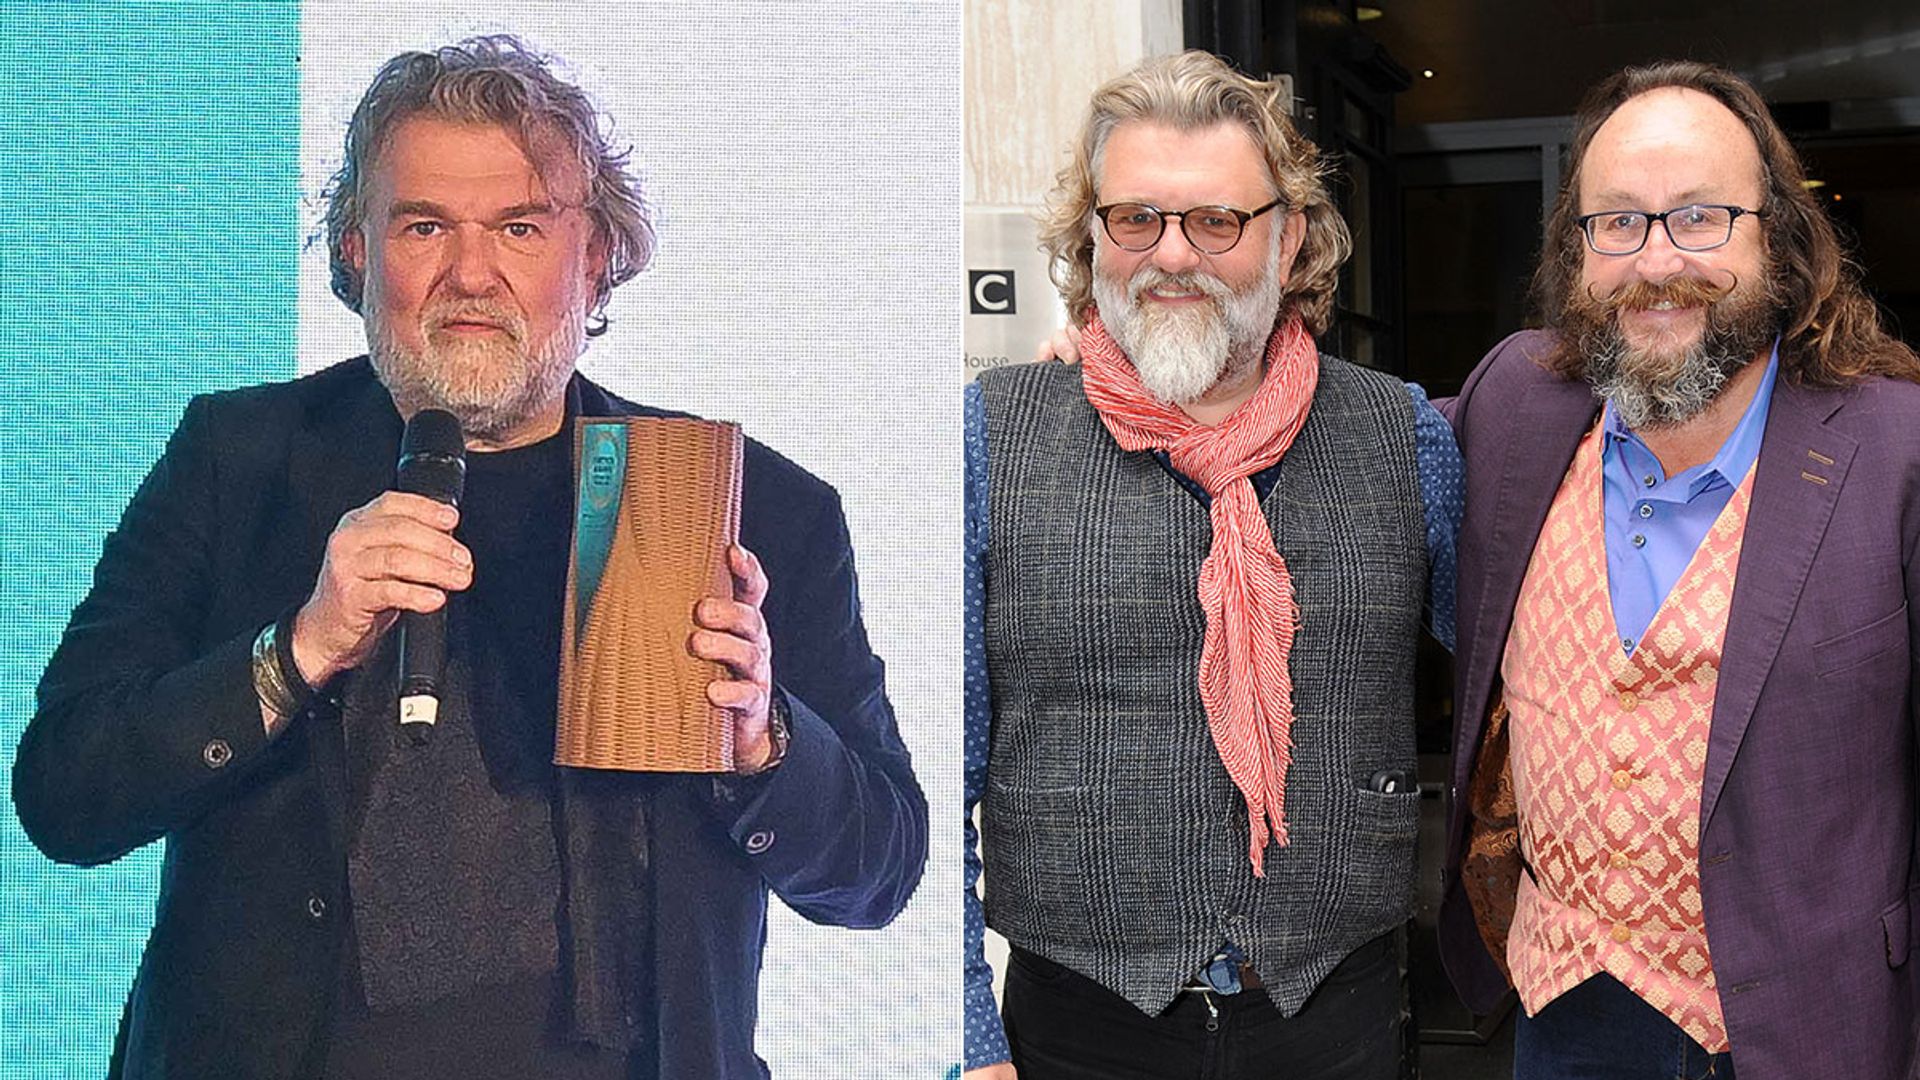 The Hairy Bikers' Si King remembers Dave Myers in moving speech that brings crowd to a standstill